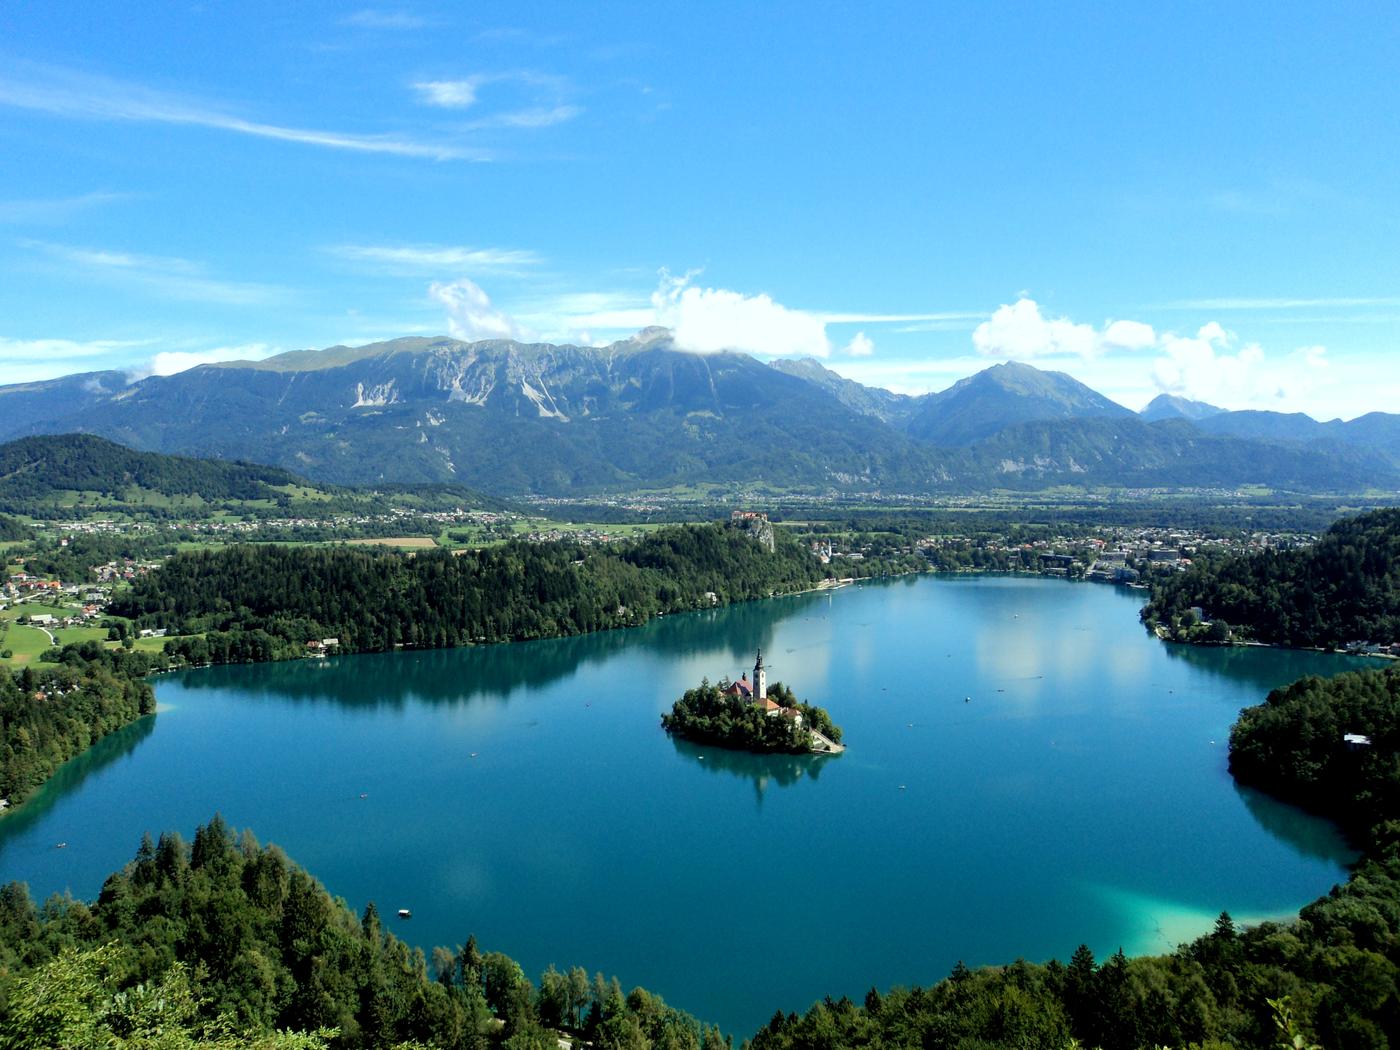 Bled: A fairy tale by the lake